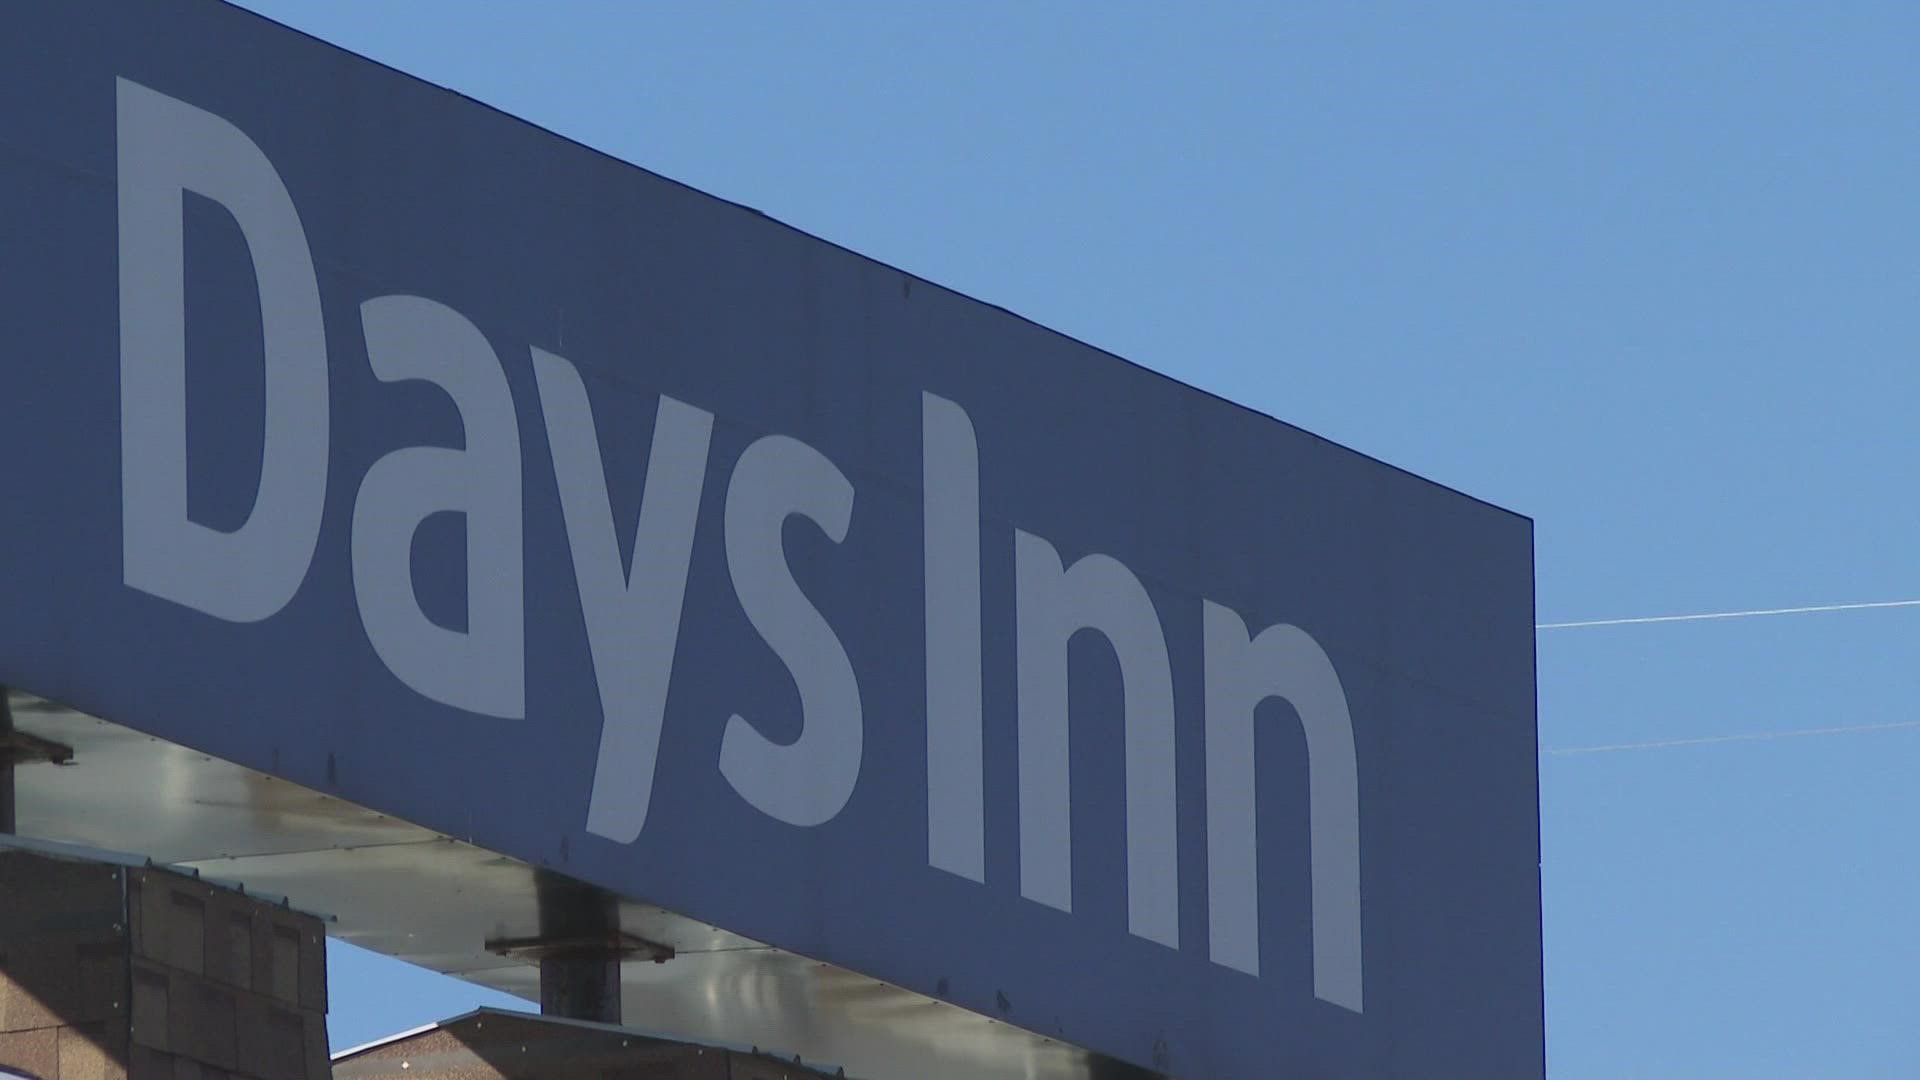 Days Inn and Comfort Inn told city officials that contracts to shelter people, which expire May 31, would not be renewed.